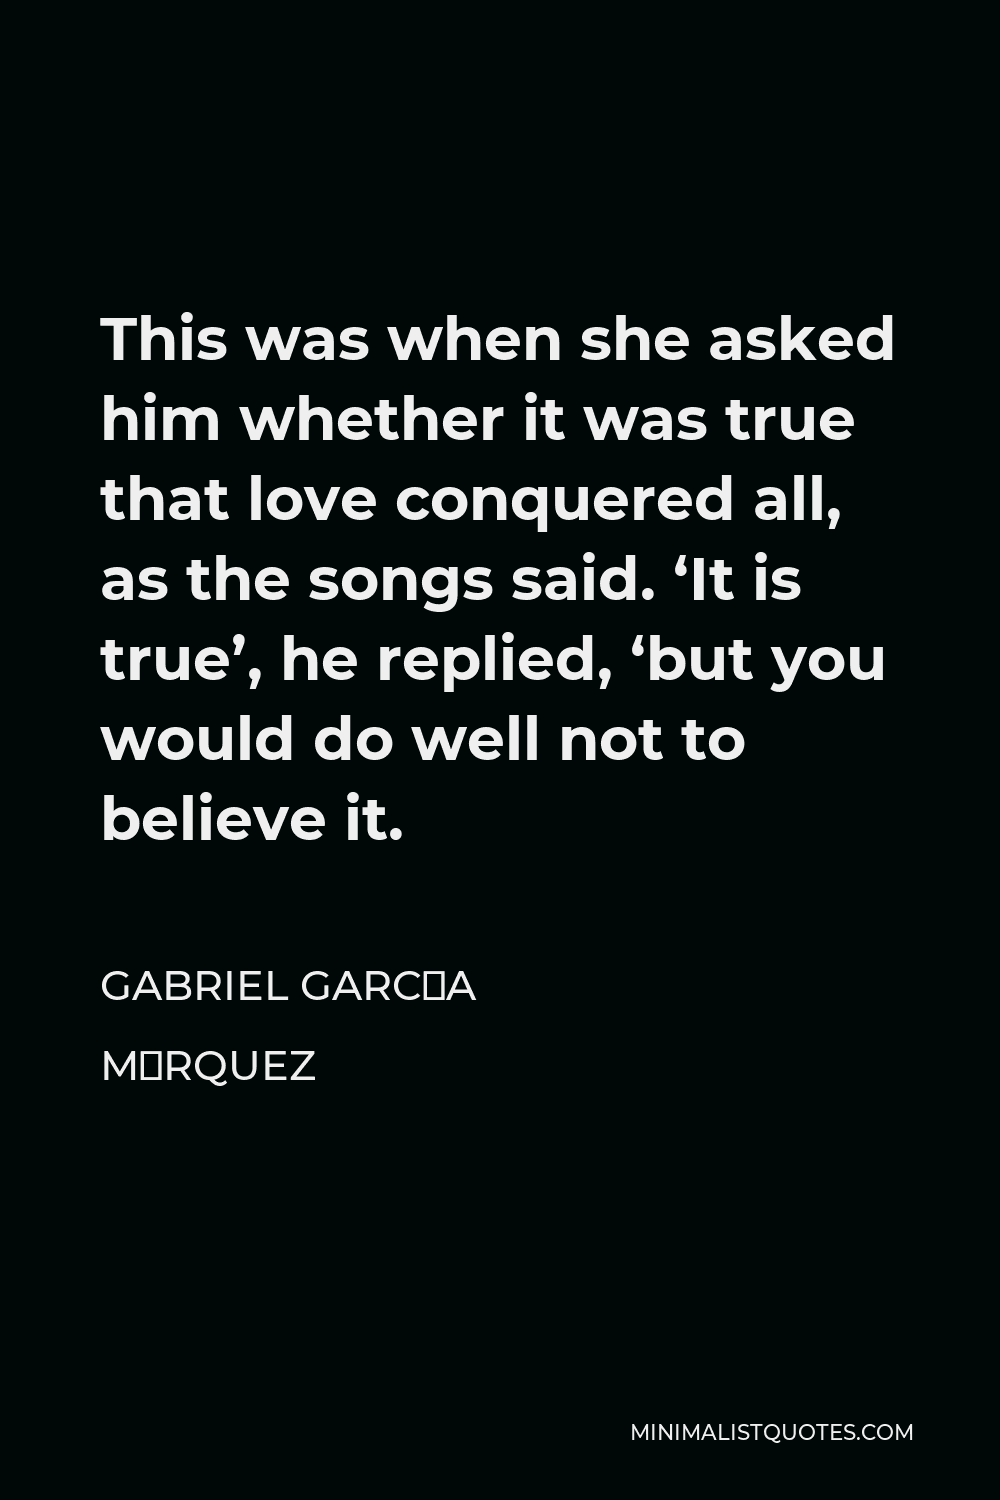 Gabriel García Márquez Quote - This was when she asked him whether it was true that love conquered all, as the songs said. ‘It is true’, he replied, ‘but you would do well not to believe it.